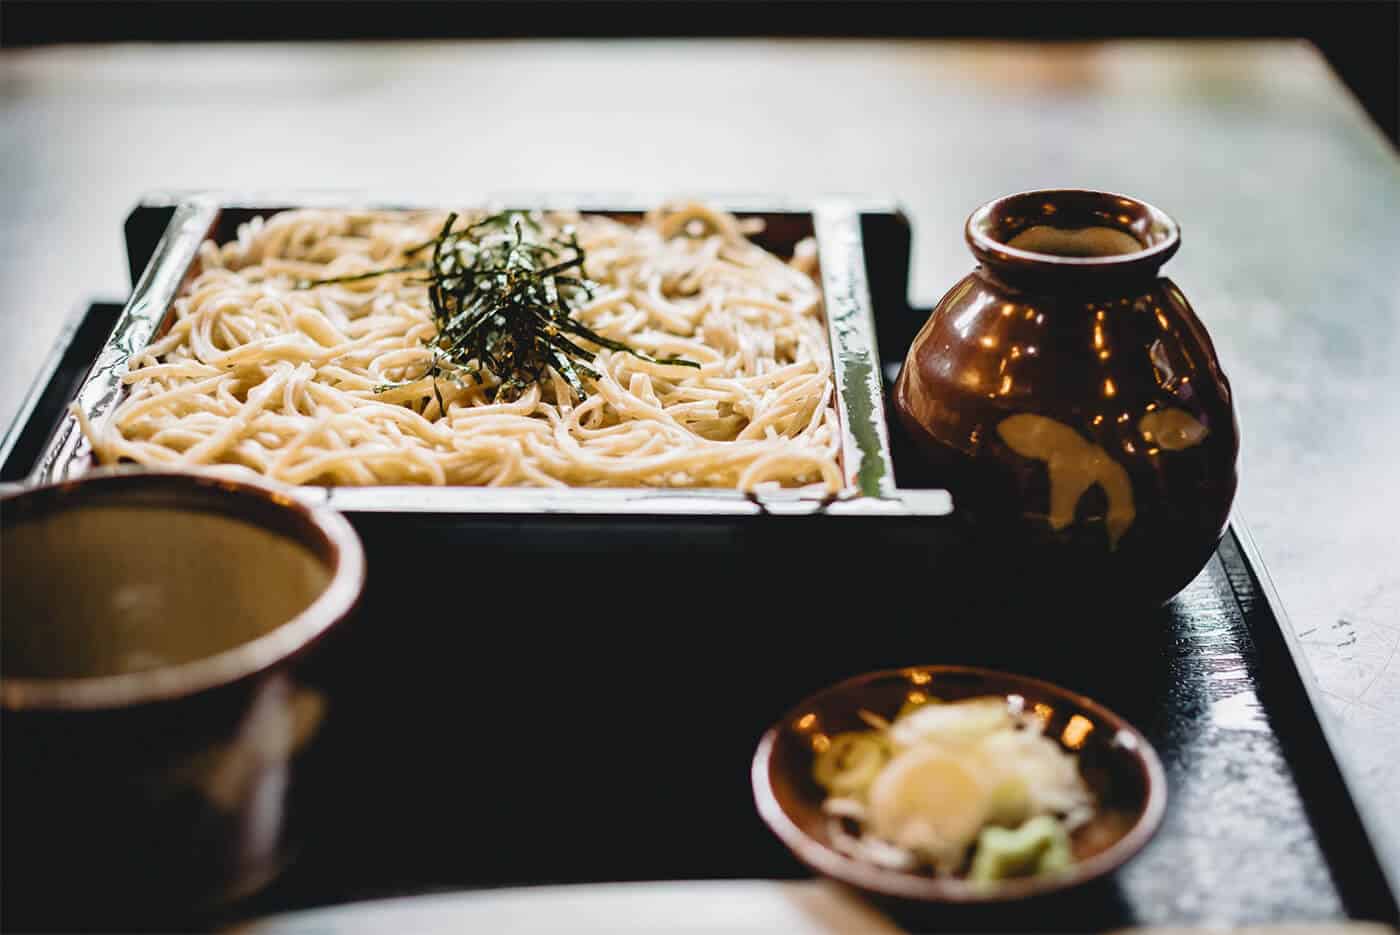 soba noodles in a dish ready to be eaten.